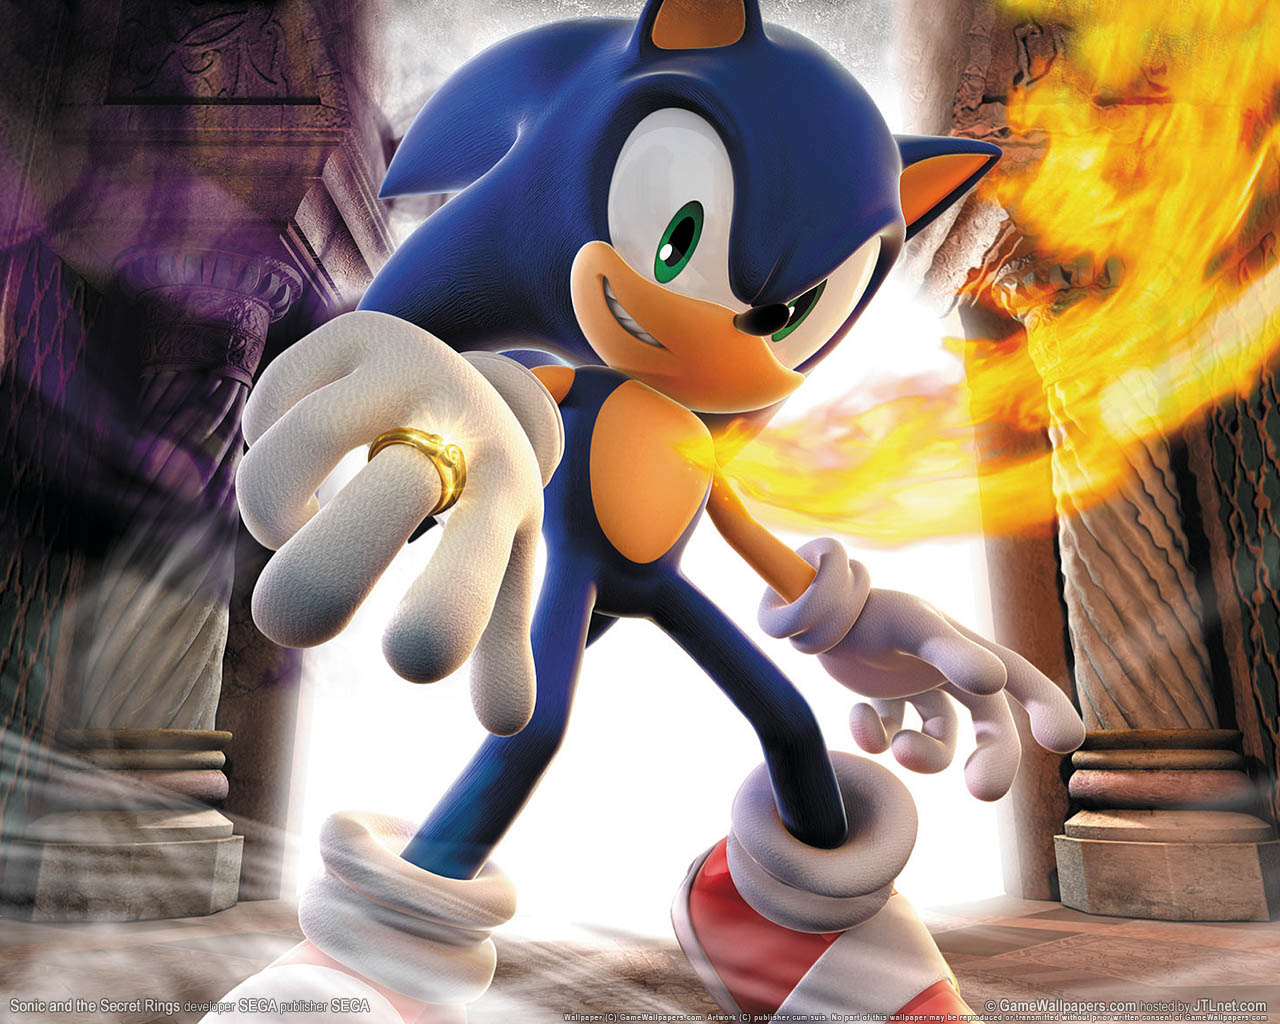 Sonic and the Secret Rings wallpaper 01 1280x1024